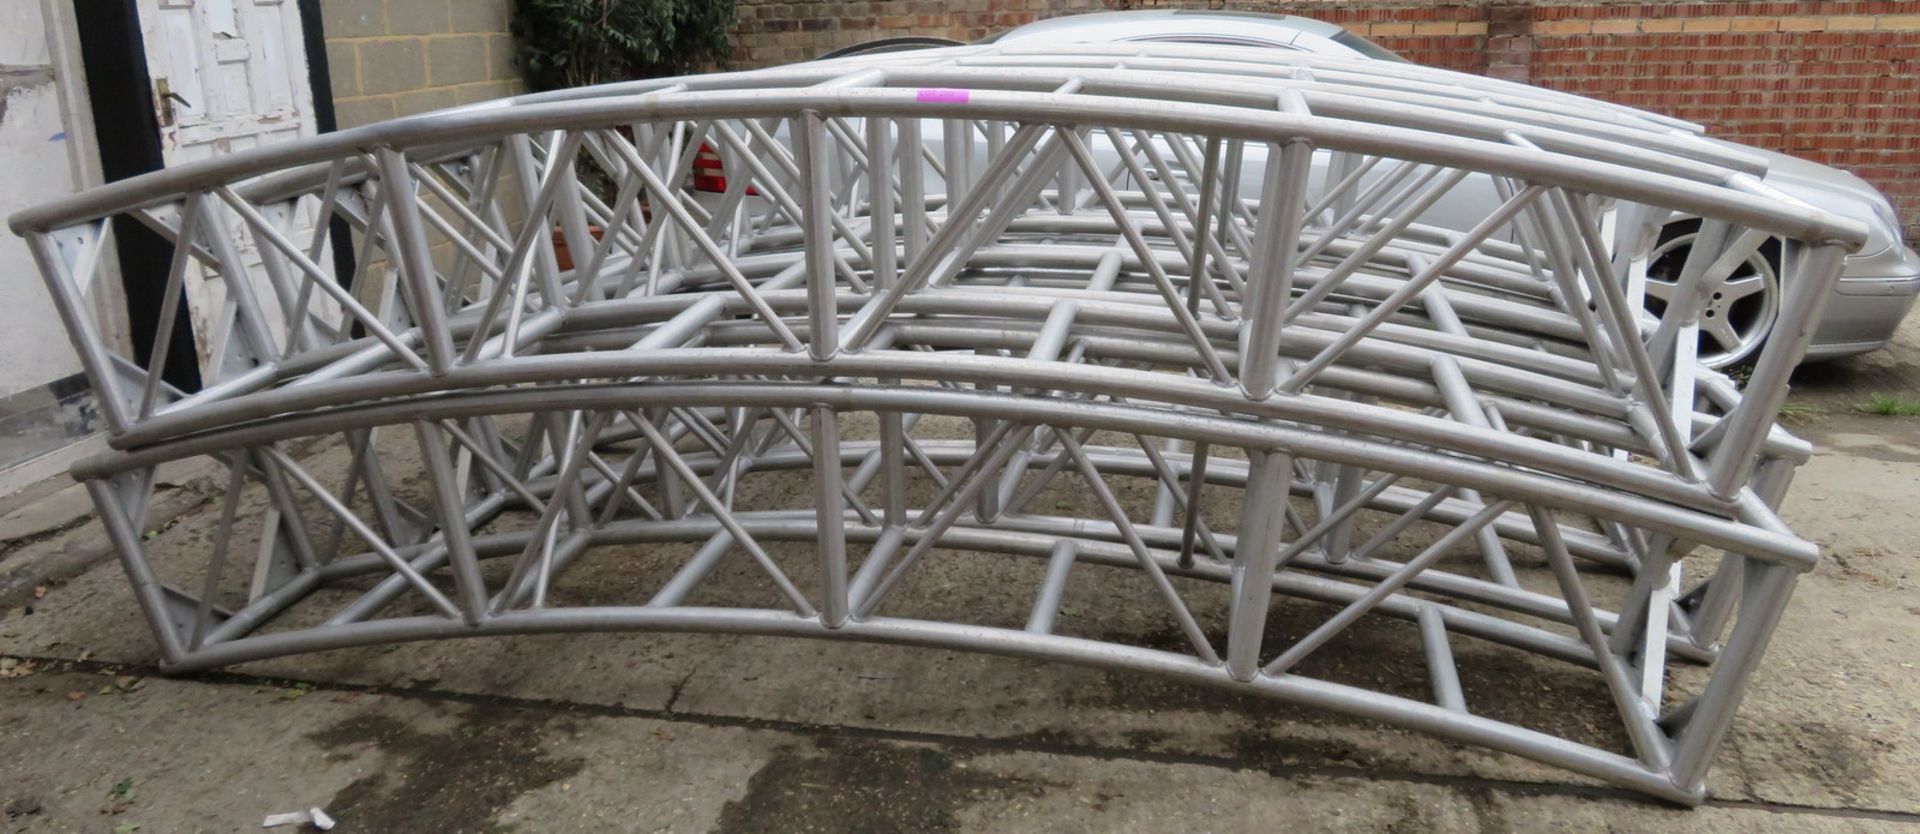 8x Tomcat 3.6m curved MD truss. Good condition